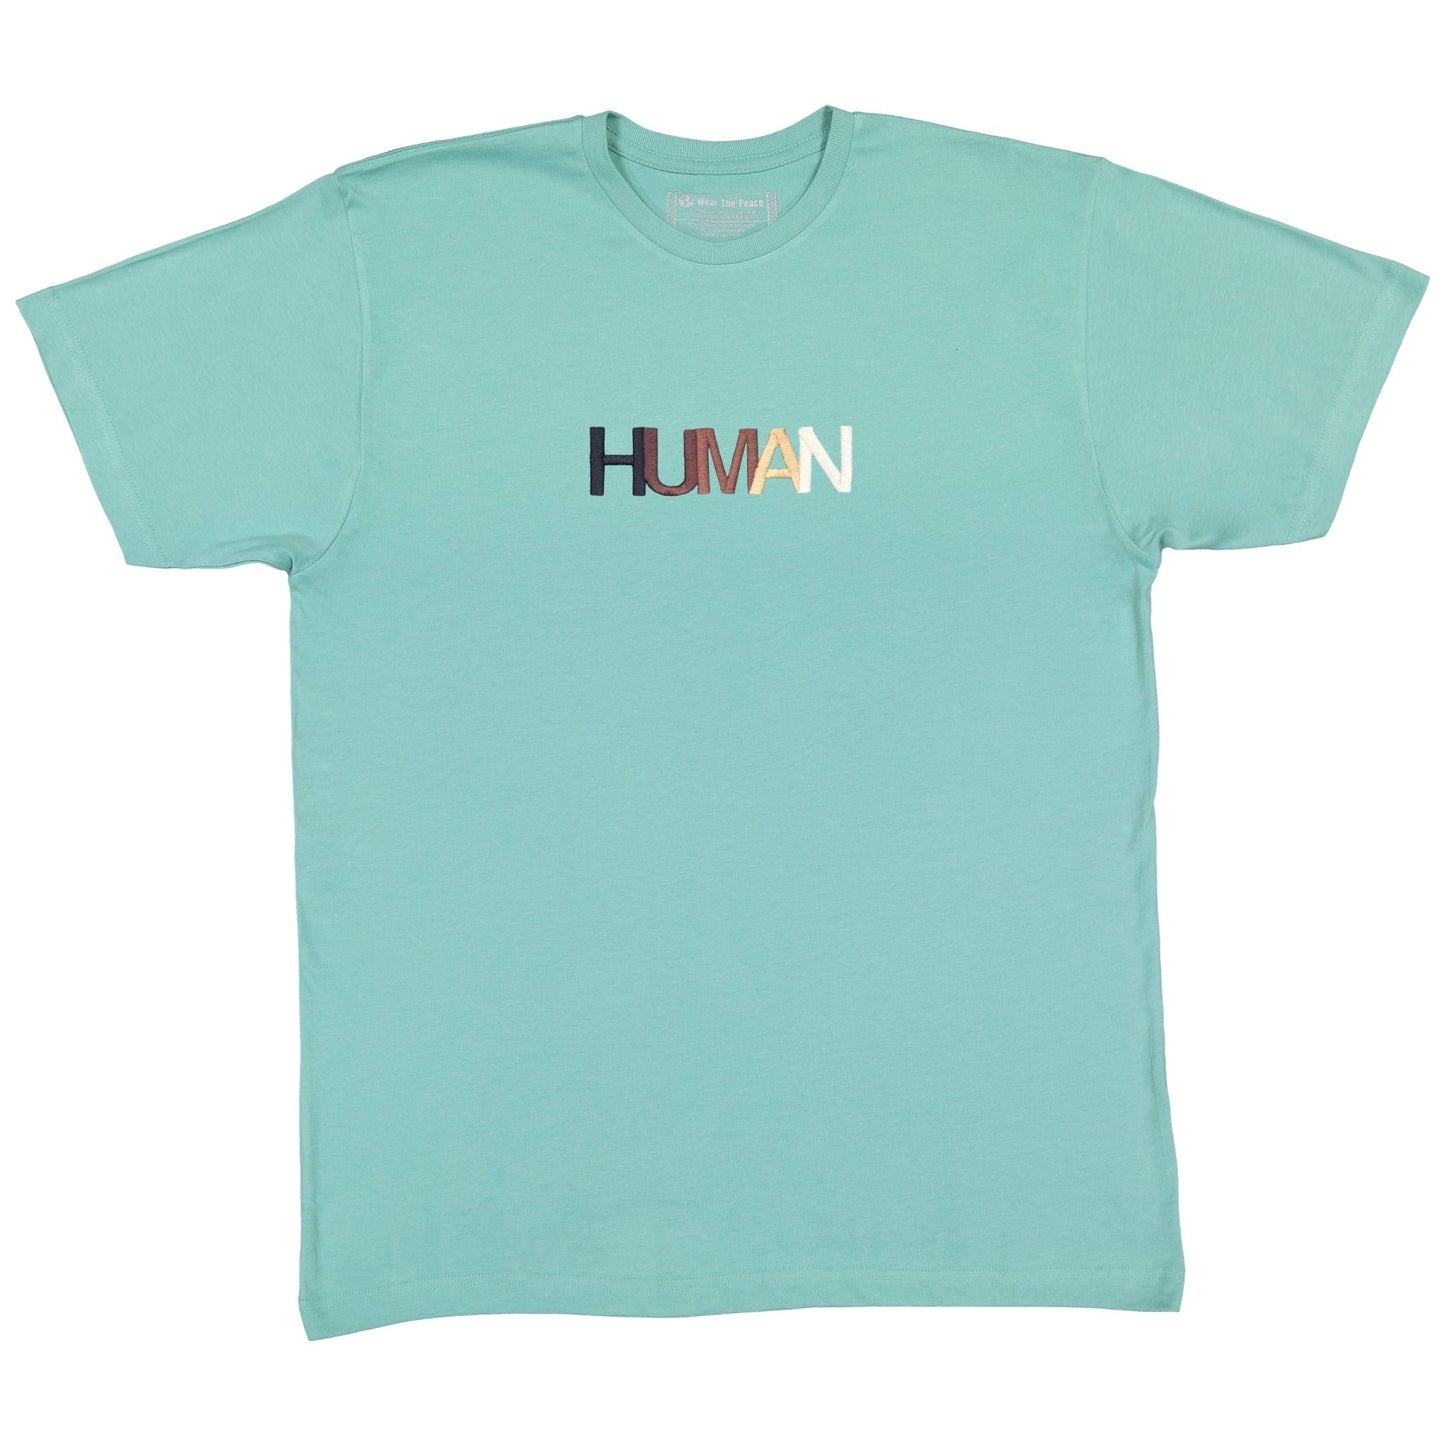 Human Embroidered Tee  We Are All Human – Wear The Peace